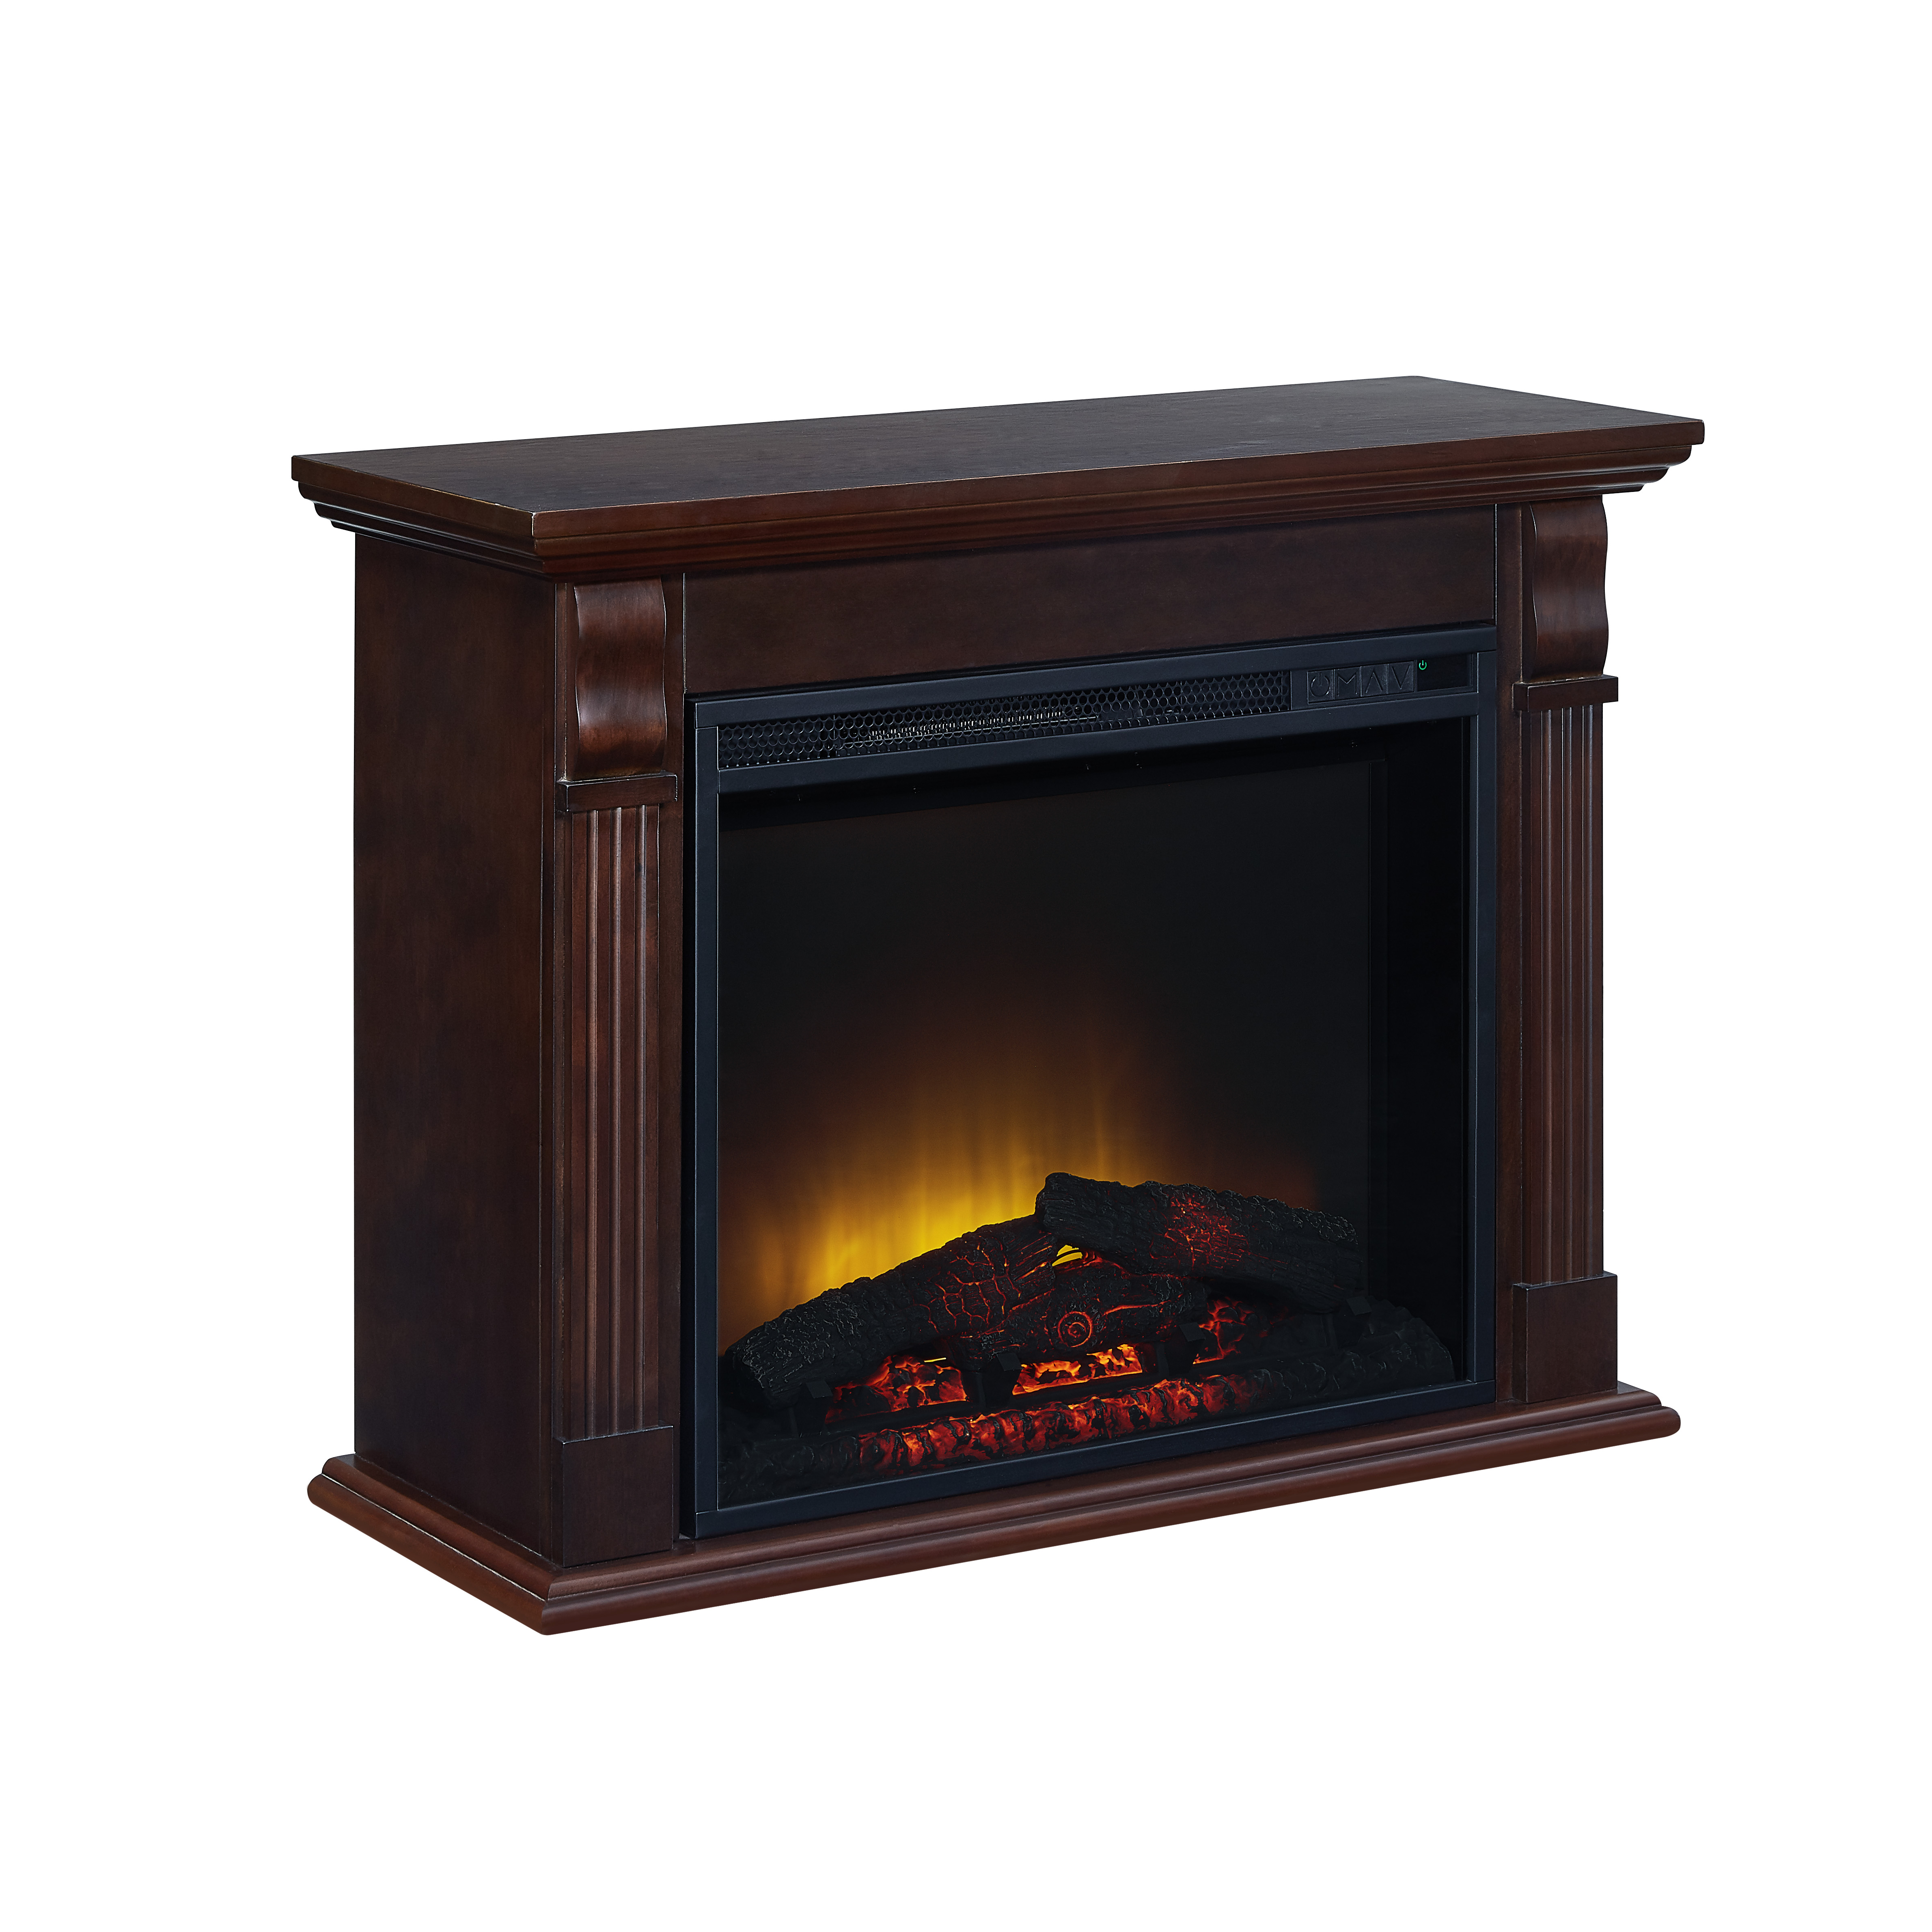 Portable Fireplace Big Lots Elegant Bold Flame 33 46 Inch Electric Fireplace In Chestnut